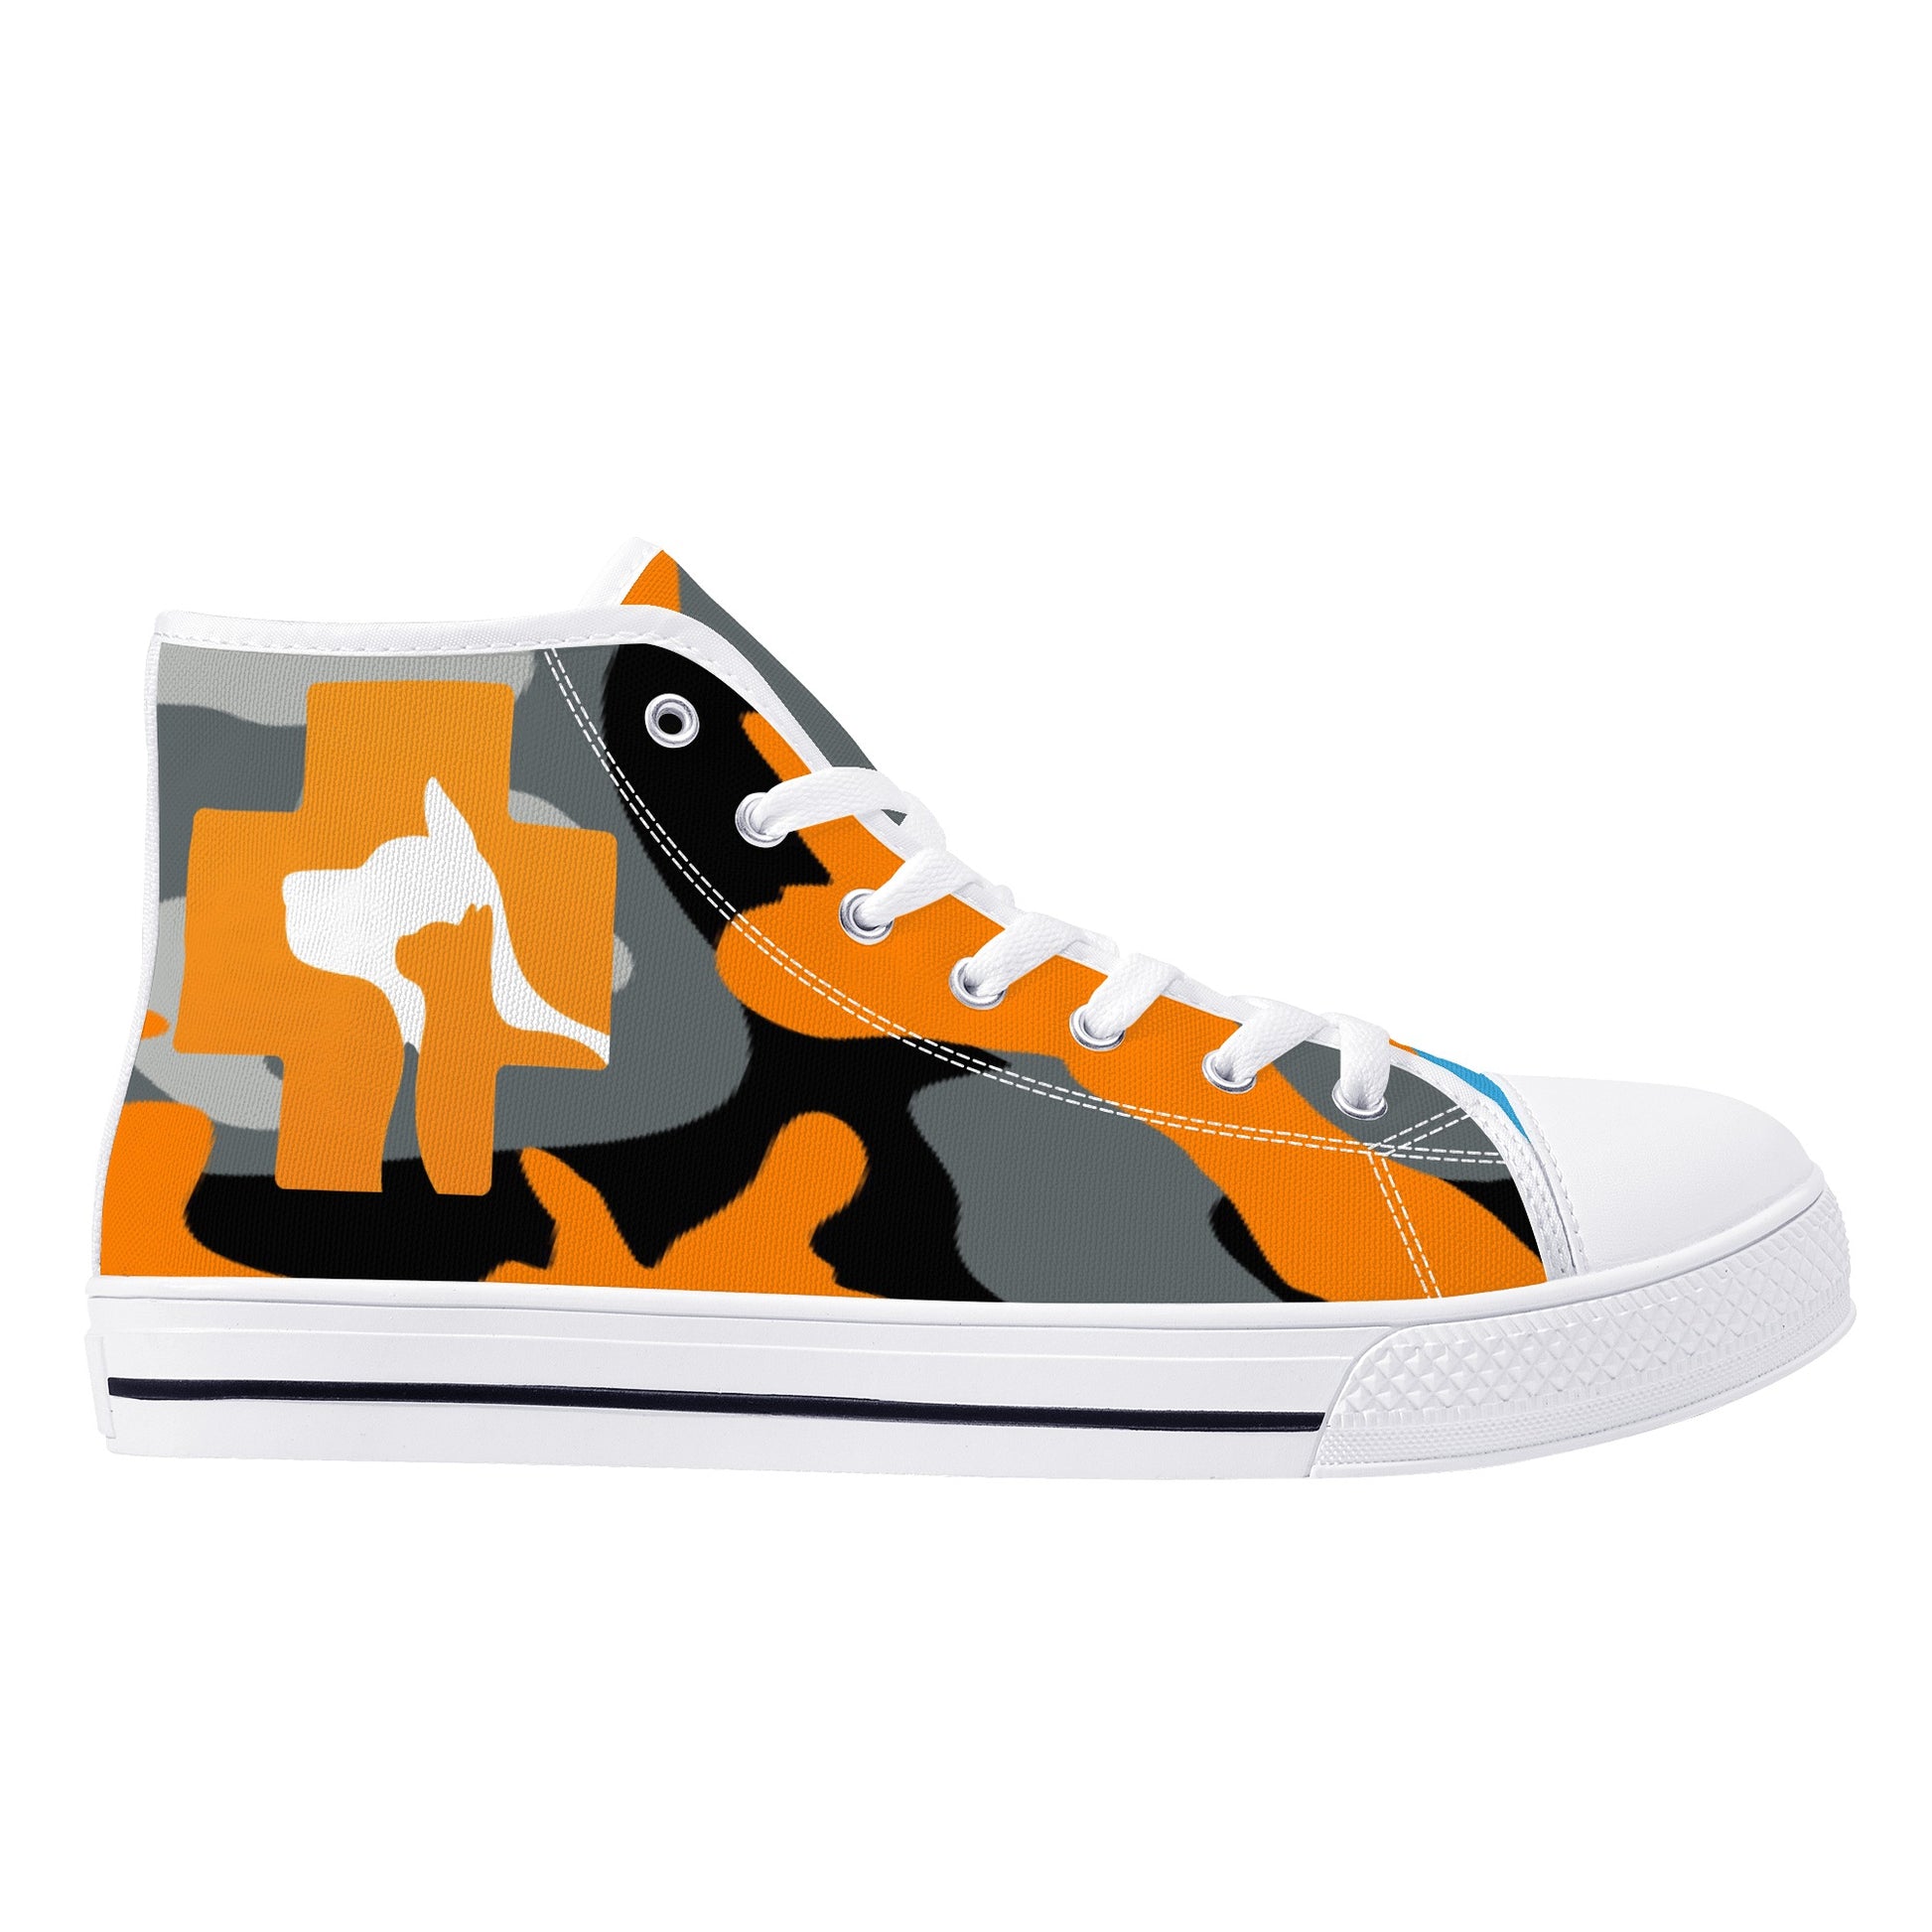 Stand out  with the  Nugget Army Vets Mens High Top Canvas Shoes  available at Hey Nugget. Grab yours today!